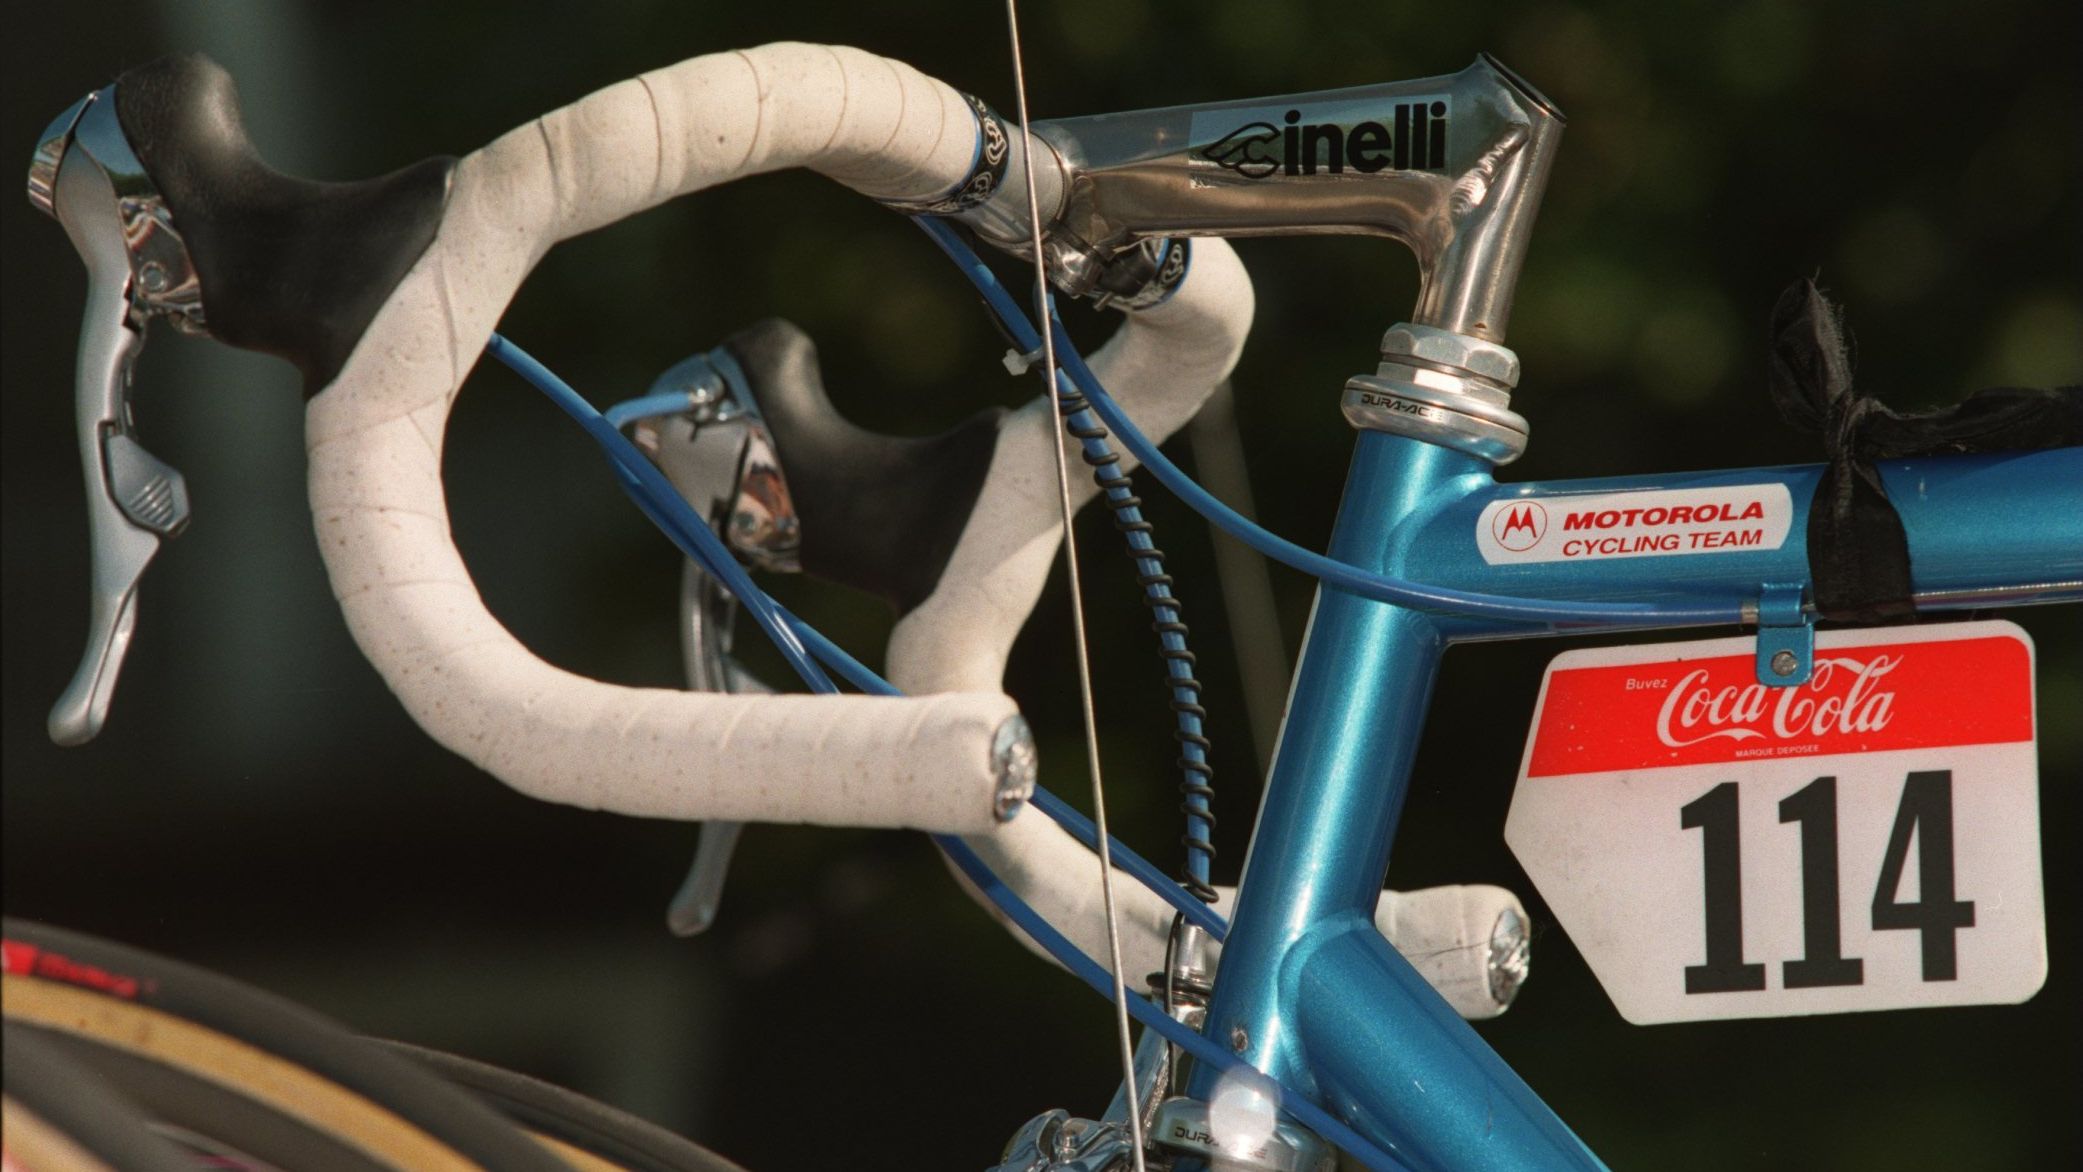 The bike ridden by Fabio Casartelli when he crashed and died during the 1995 Tour de France is on display in the chapel.